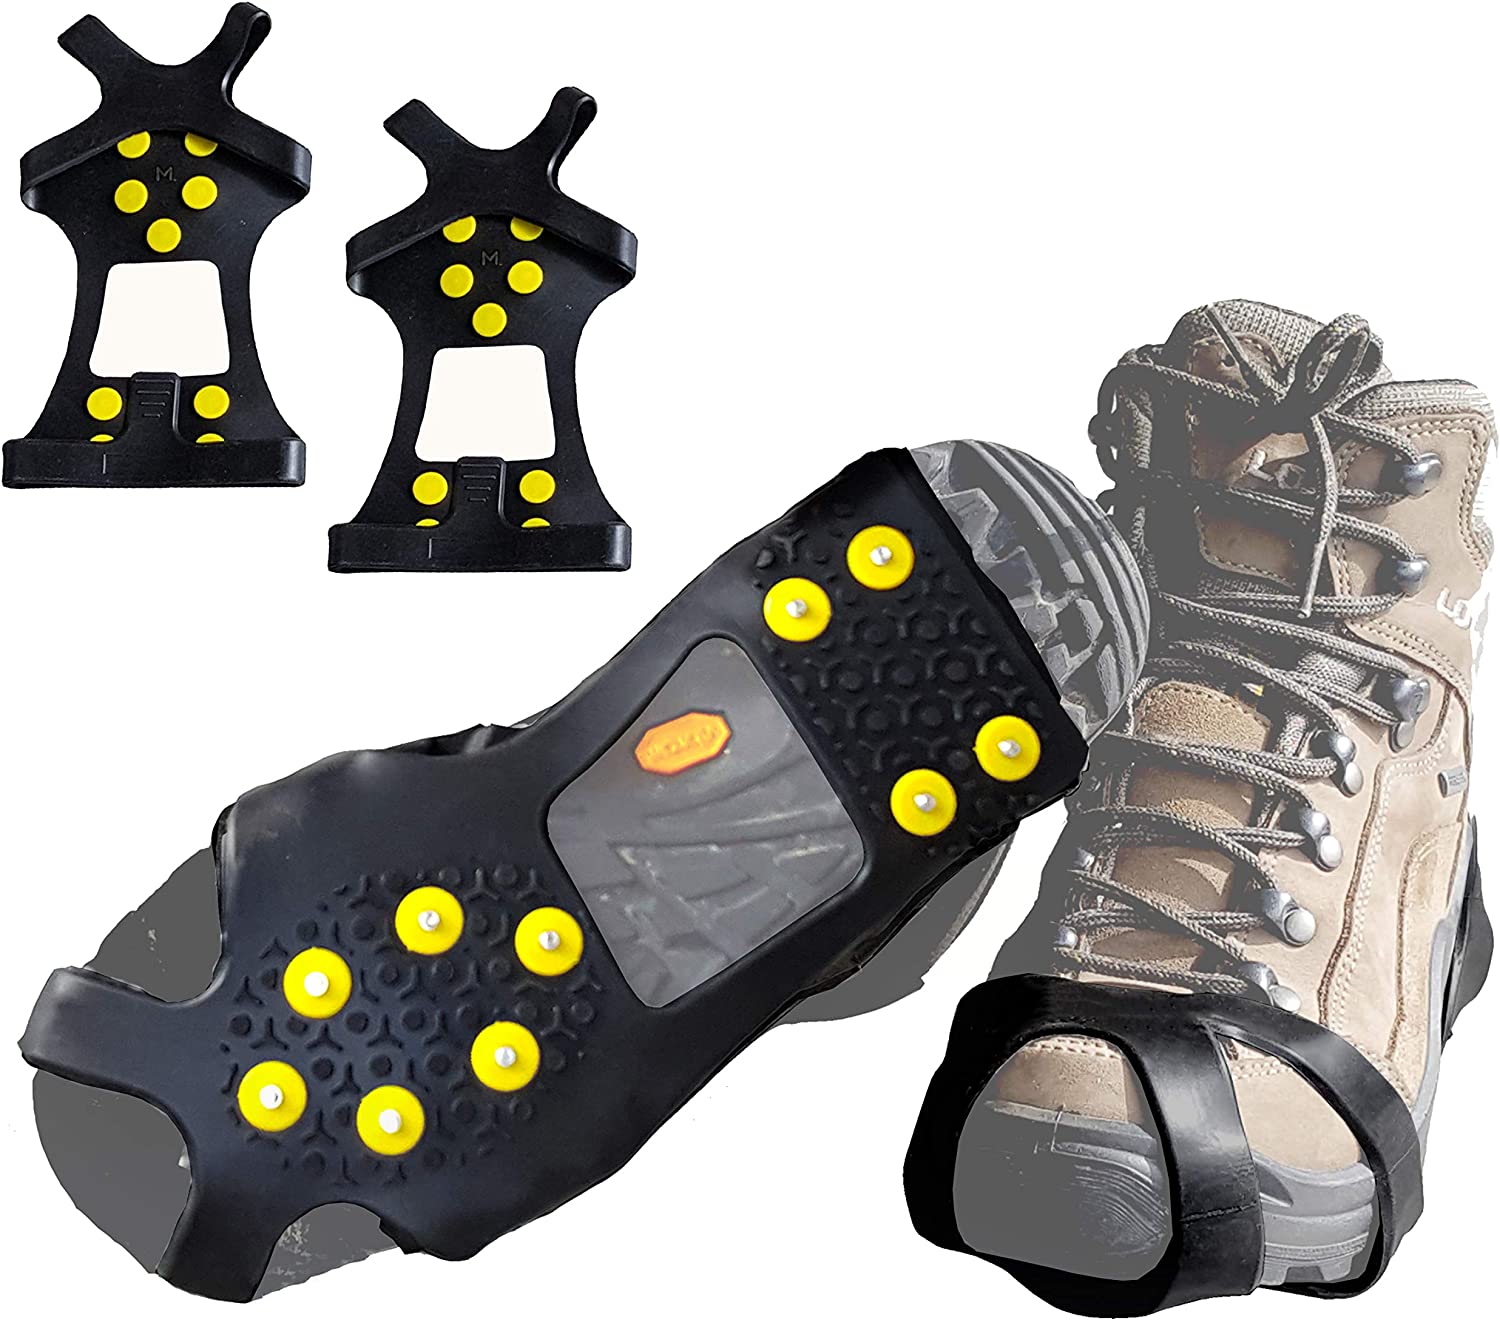 Limm Crampons Ice Traction Cleats - Lightweight Traction Cleats for Walking on Snow & Ice - Anti Slip Shoe Grips Quickly & Easily Over Footwear - Portable Ice Grippers for Shoes & Boots